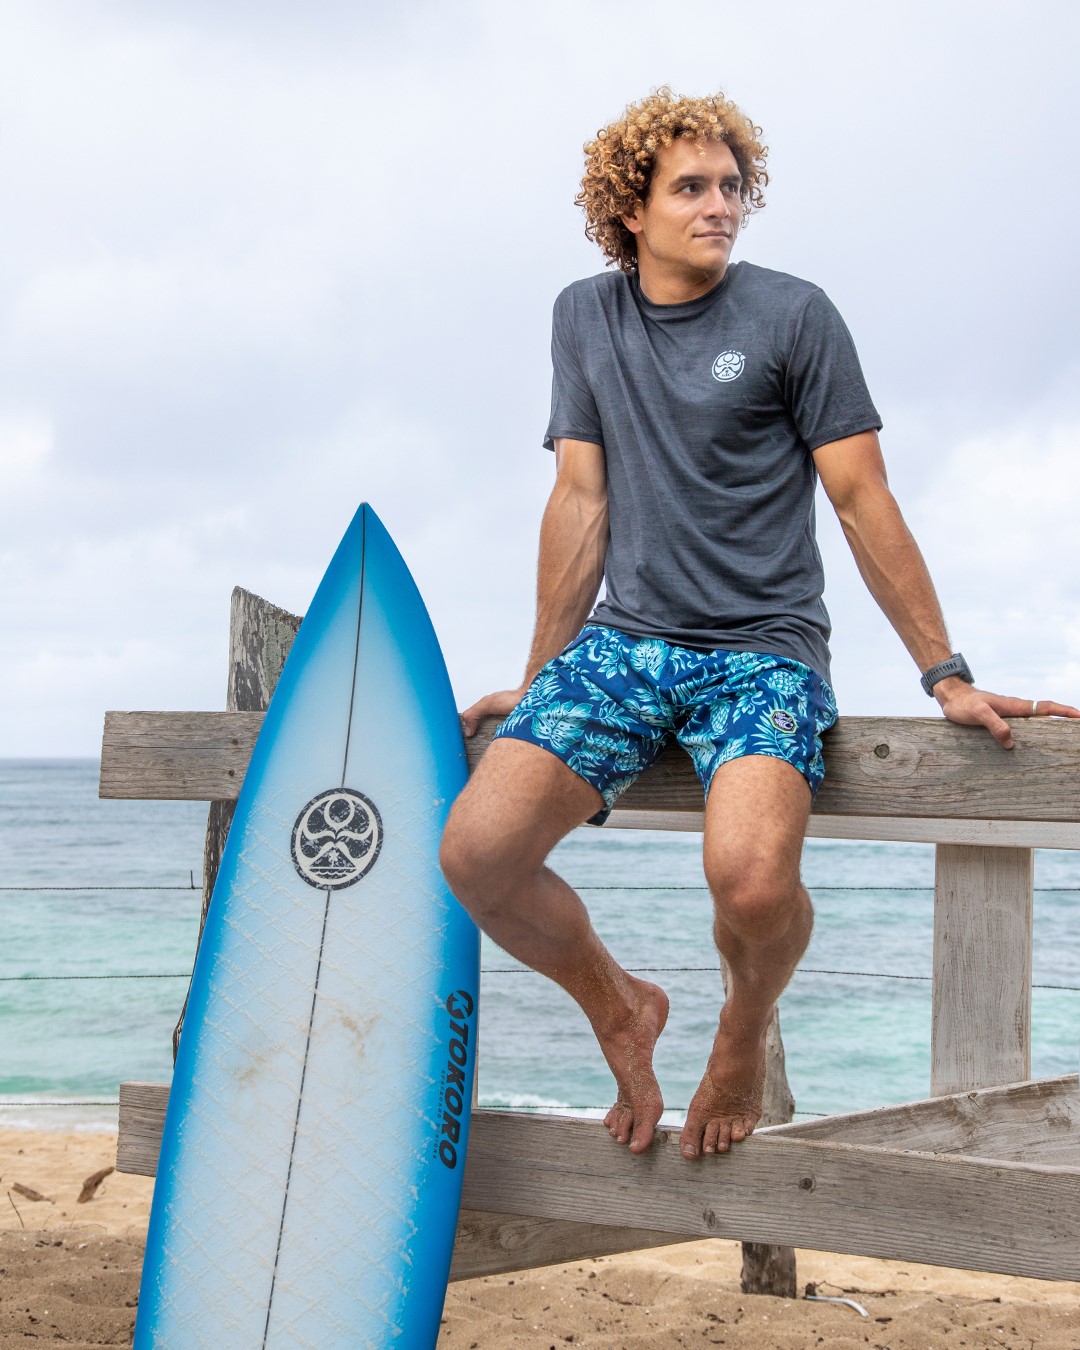 BOGO 50% Off All HIC Clothing & Accessories from Hic Surf